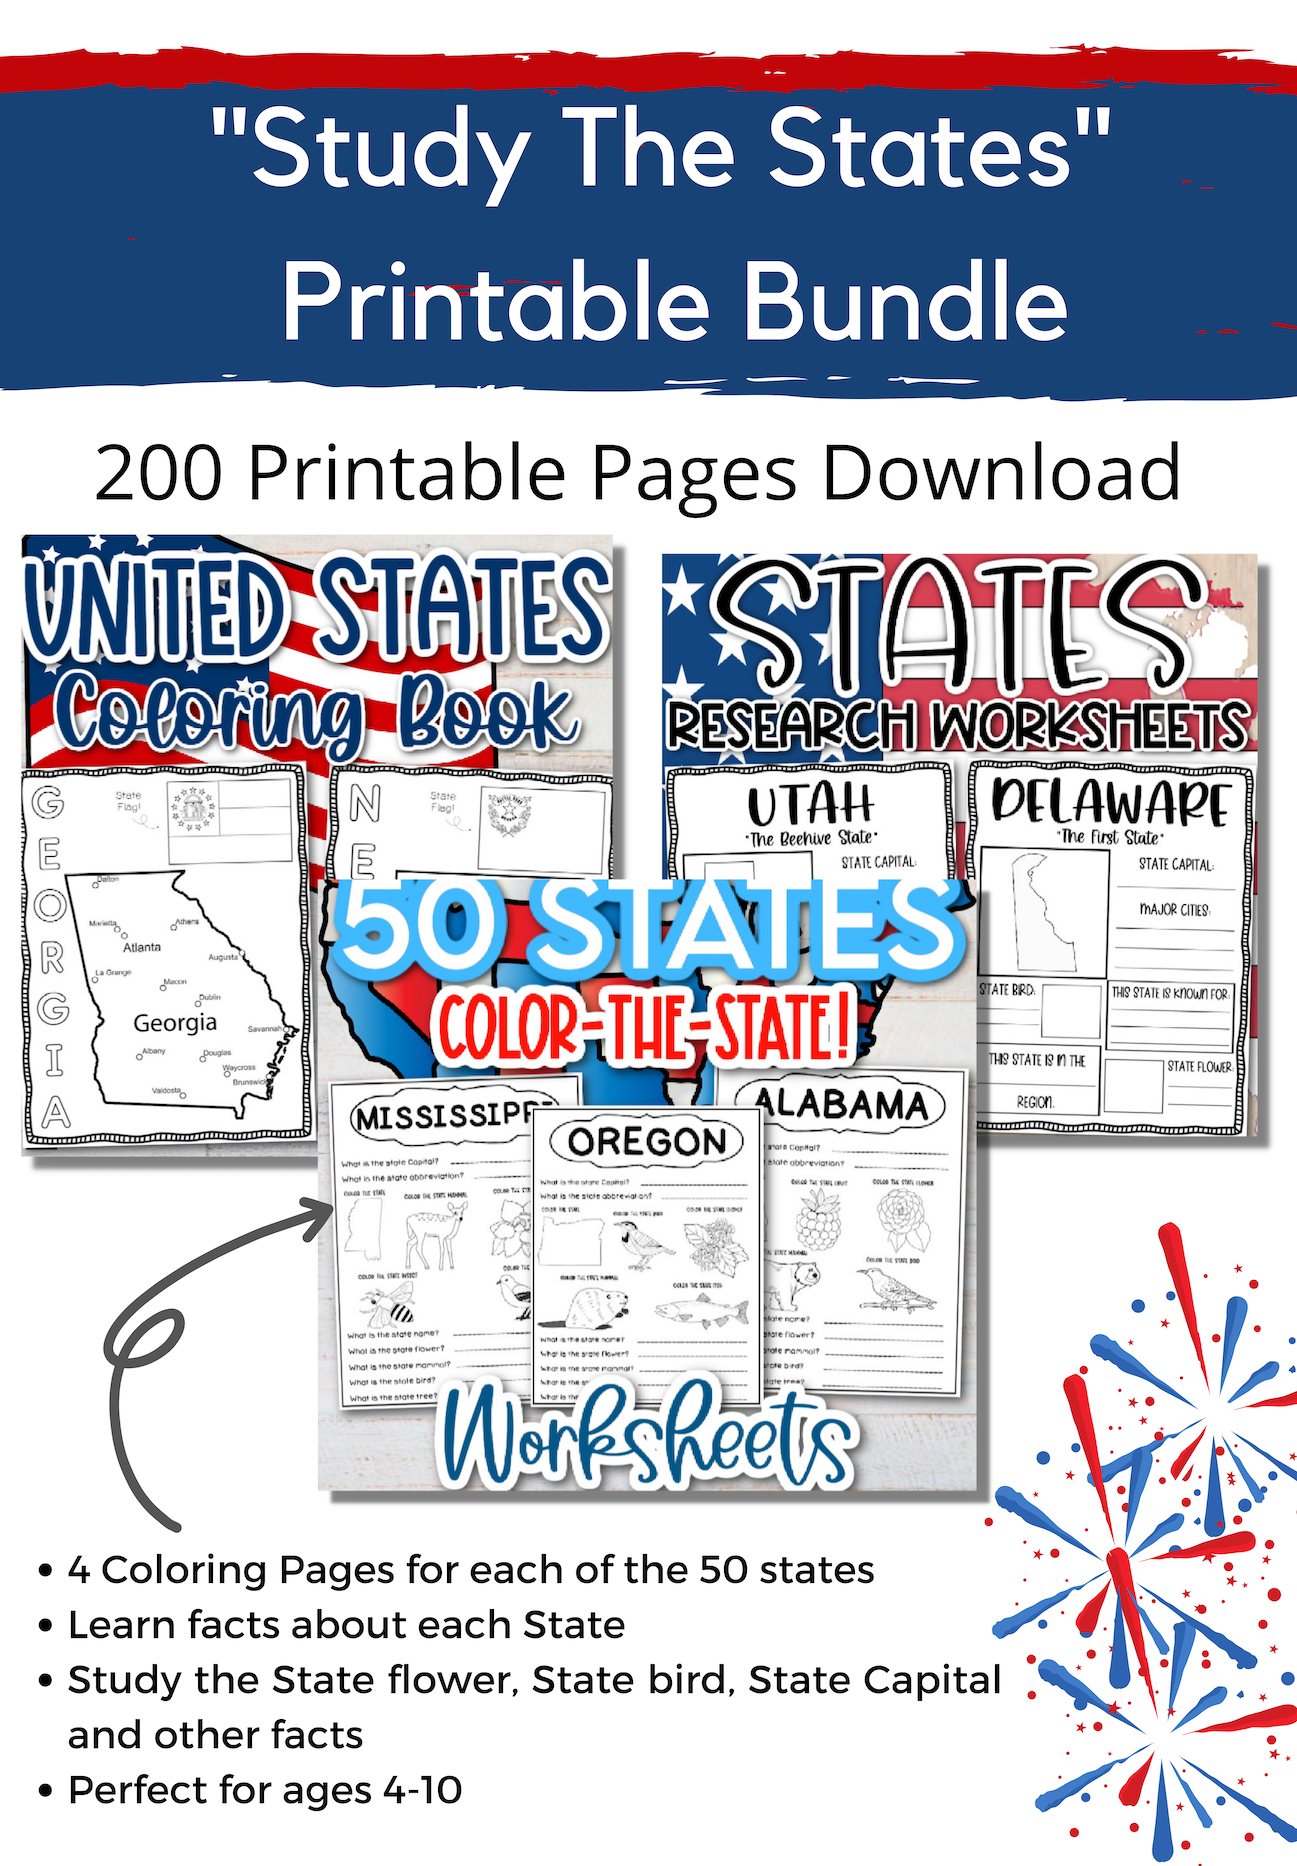 United States of America - Study the States Bundle (200 Total Pages)